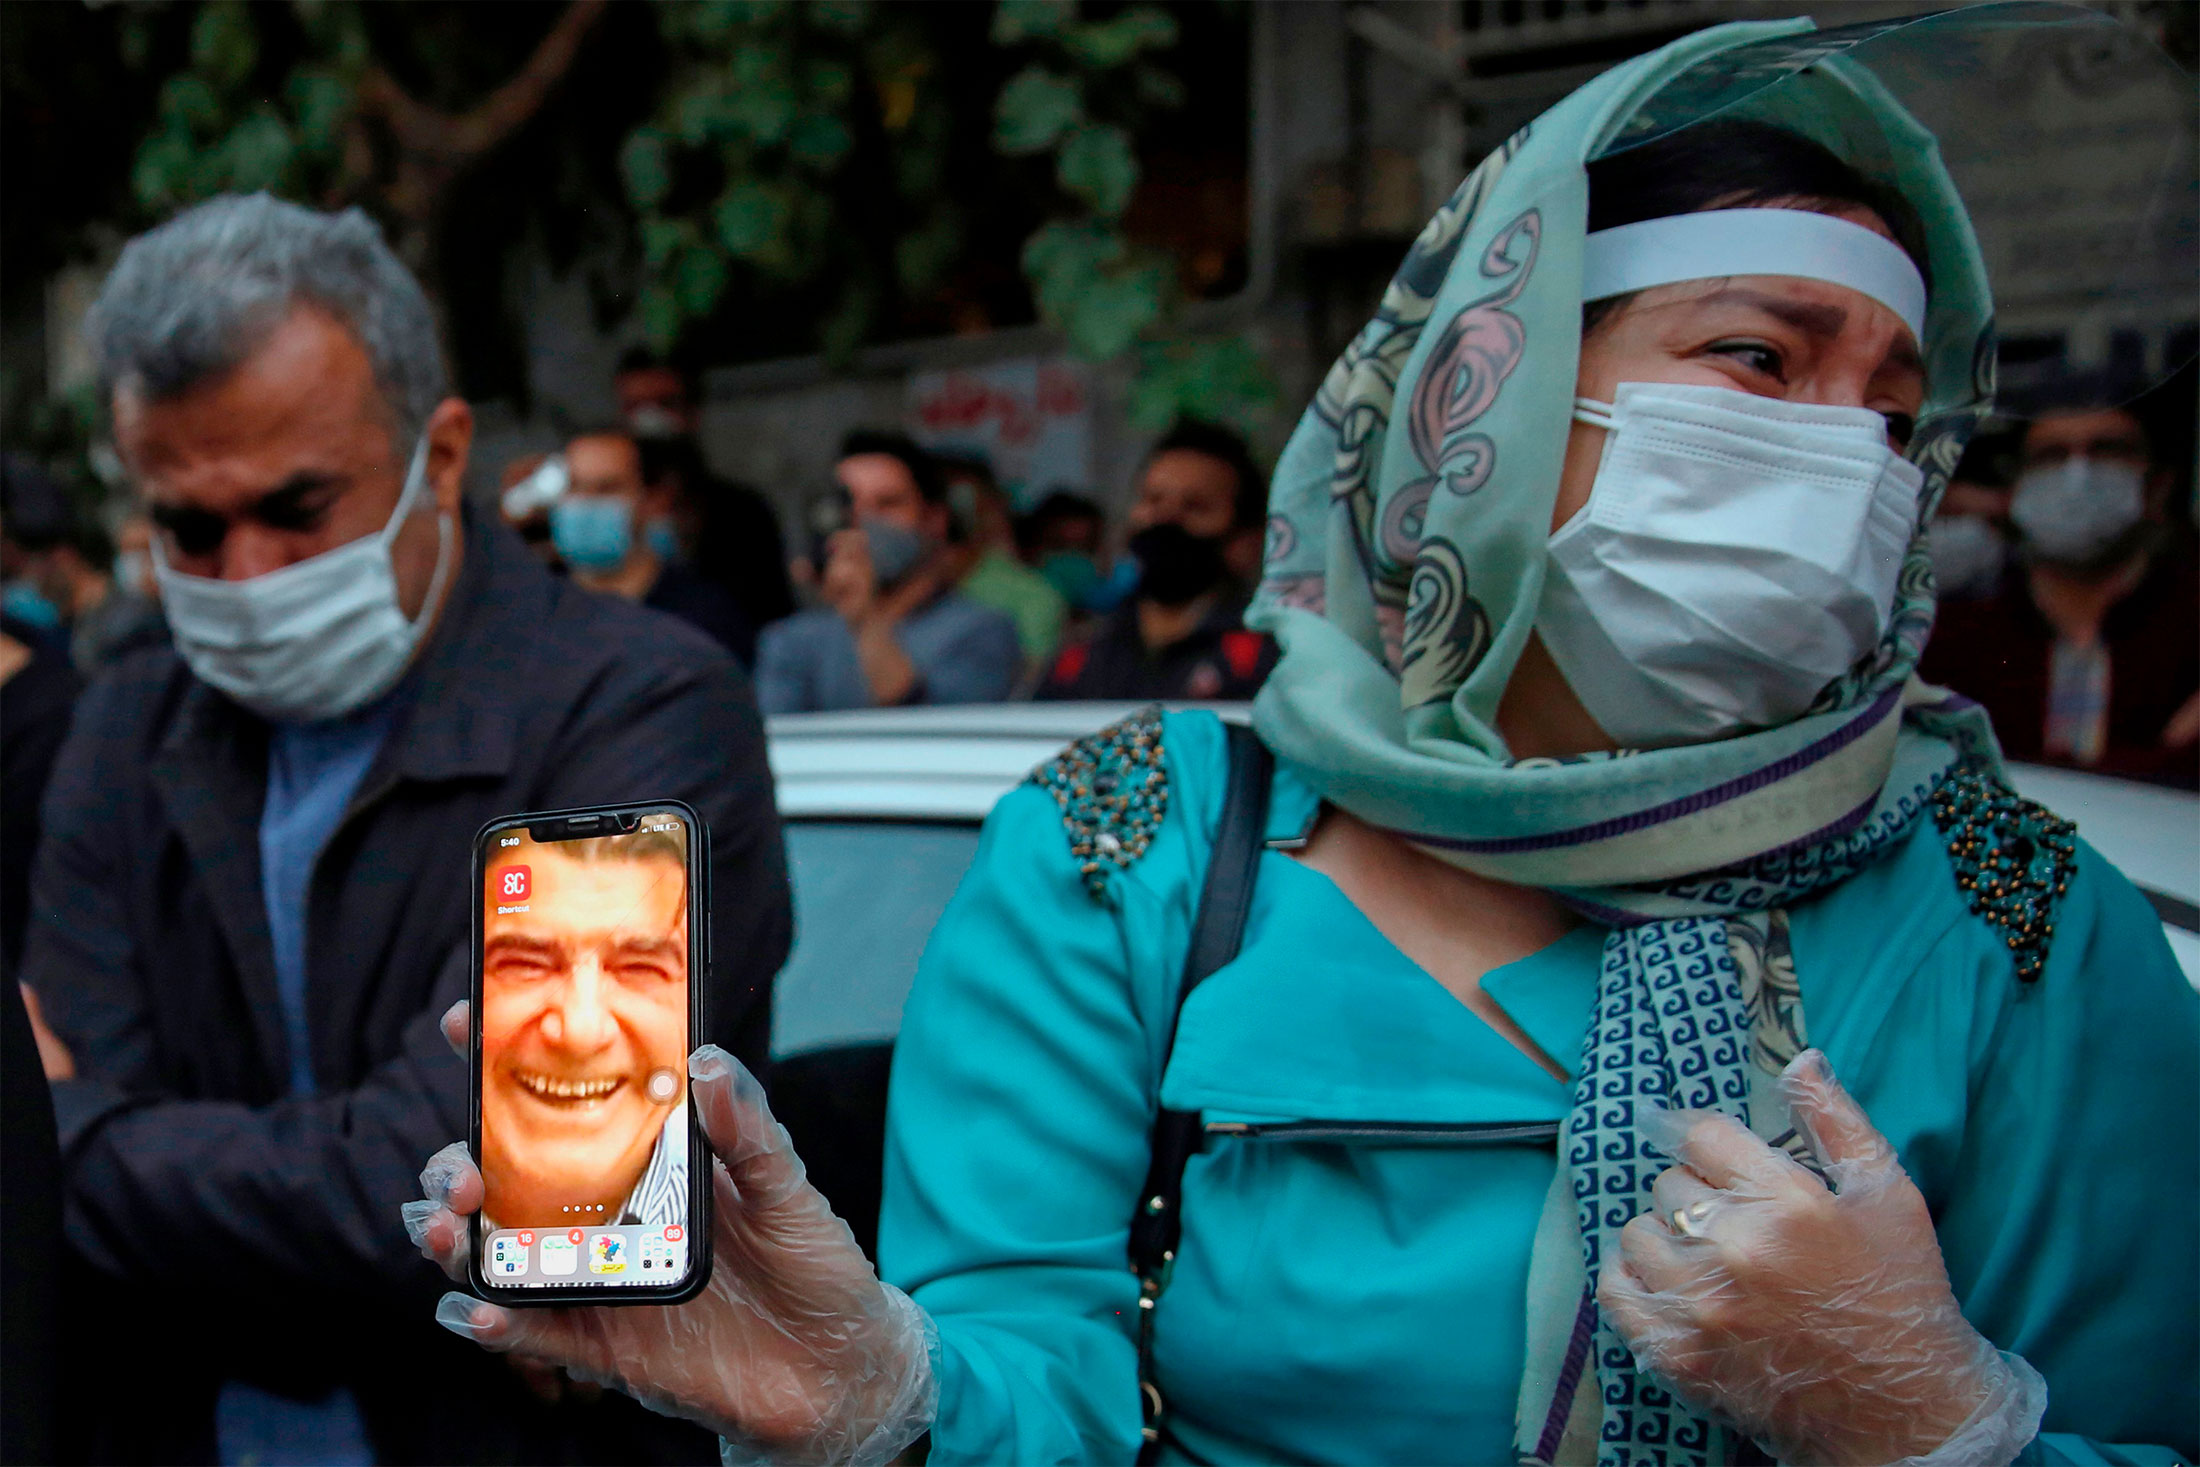 A fan of Iranian musician Mohammad Reza Shajarian displays his picture on her phone as people gather&nbsp;outside the hospital where he died, in Tehran,&nbsp;on Oct. 8.&nbsp;